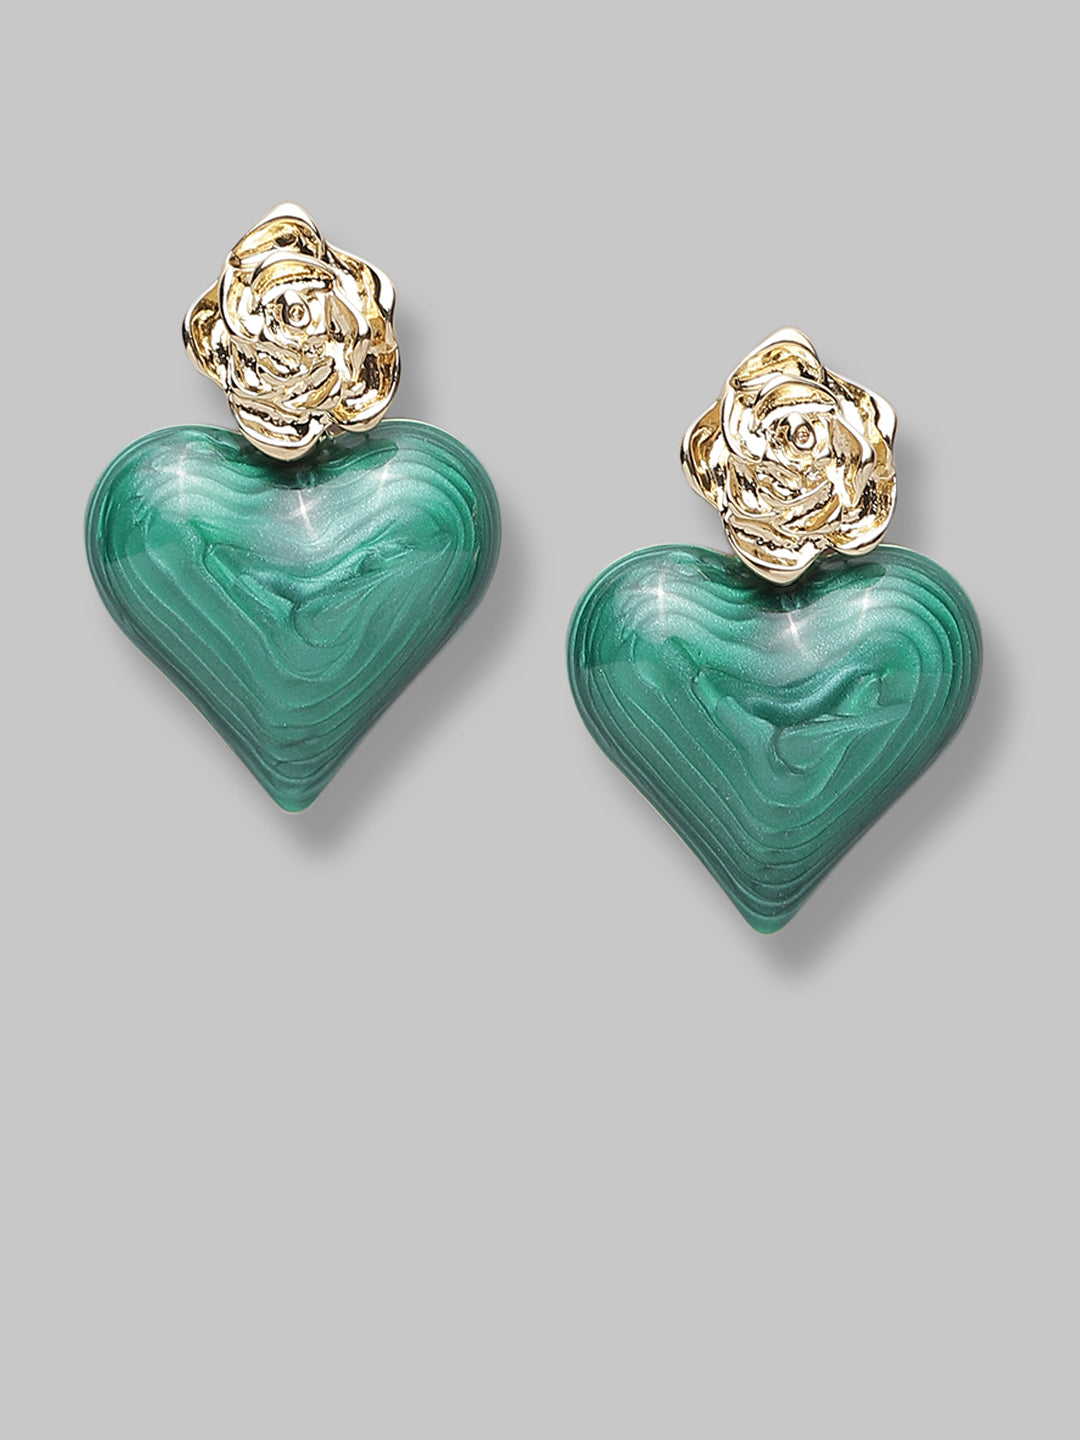 Cute Heart Shaped Earring Tops or Daily Office Wear For Girls and Women